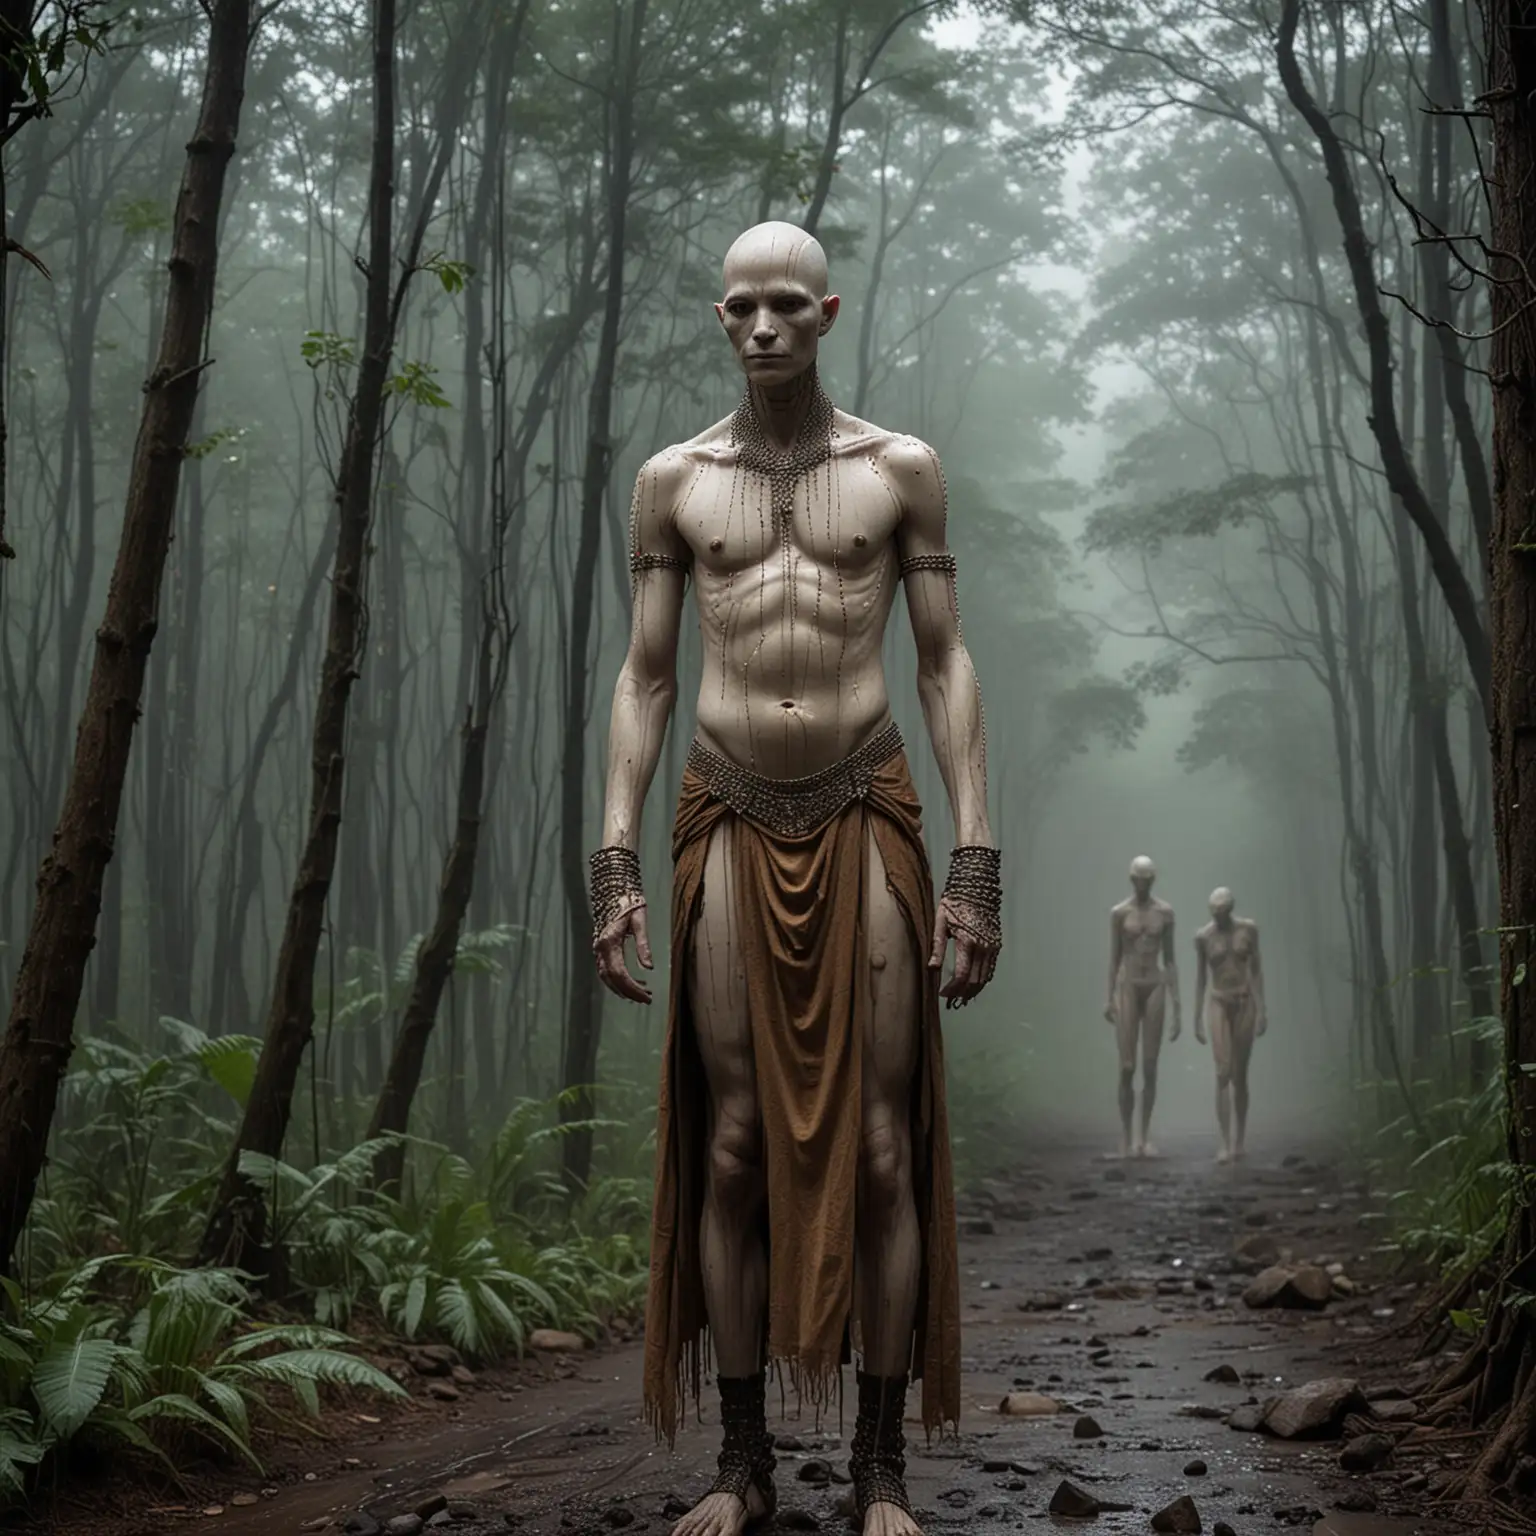 a 5m tall humanoid with pure white skin and an alien-like elongated bald head. They are wearing a brown loincloth, their body is covered with ritual scarification. They wear beads and jewels, arm bands of strange metals. They are standing in the distance in a forrest at midnight during a heavy shower of rain.